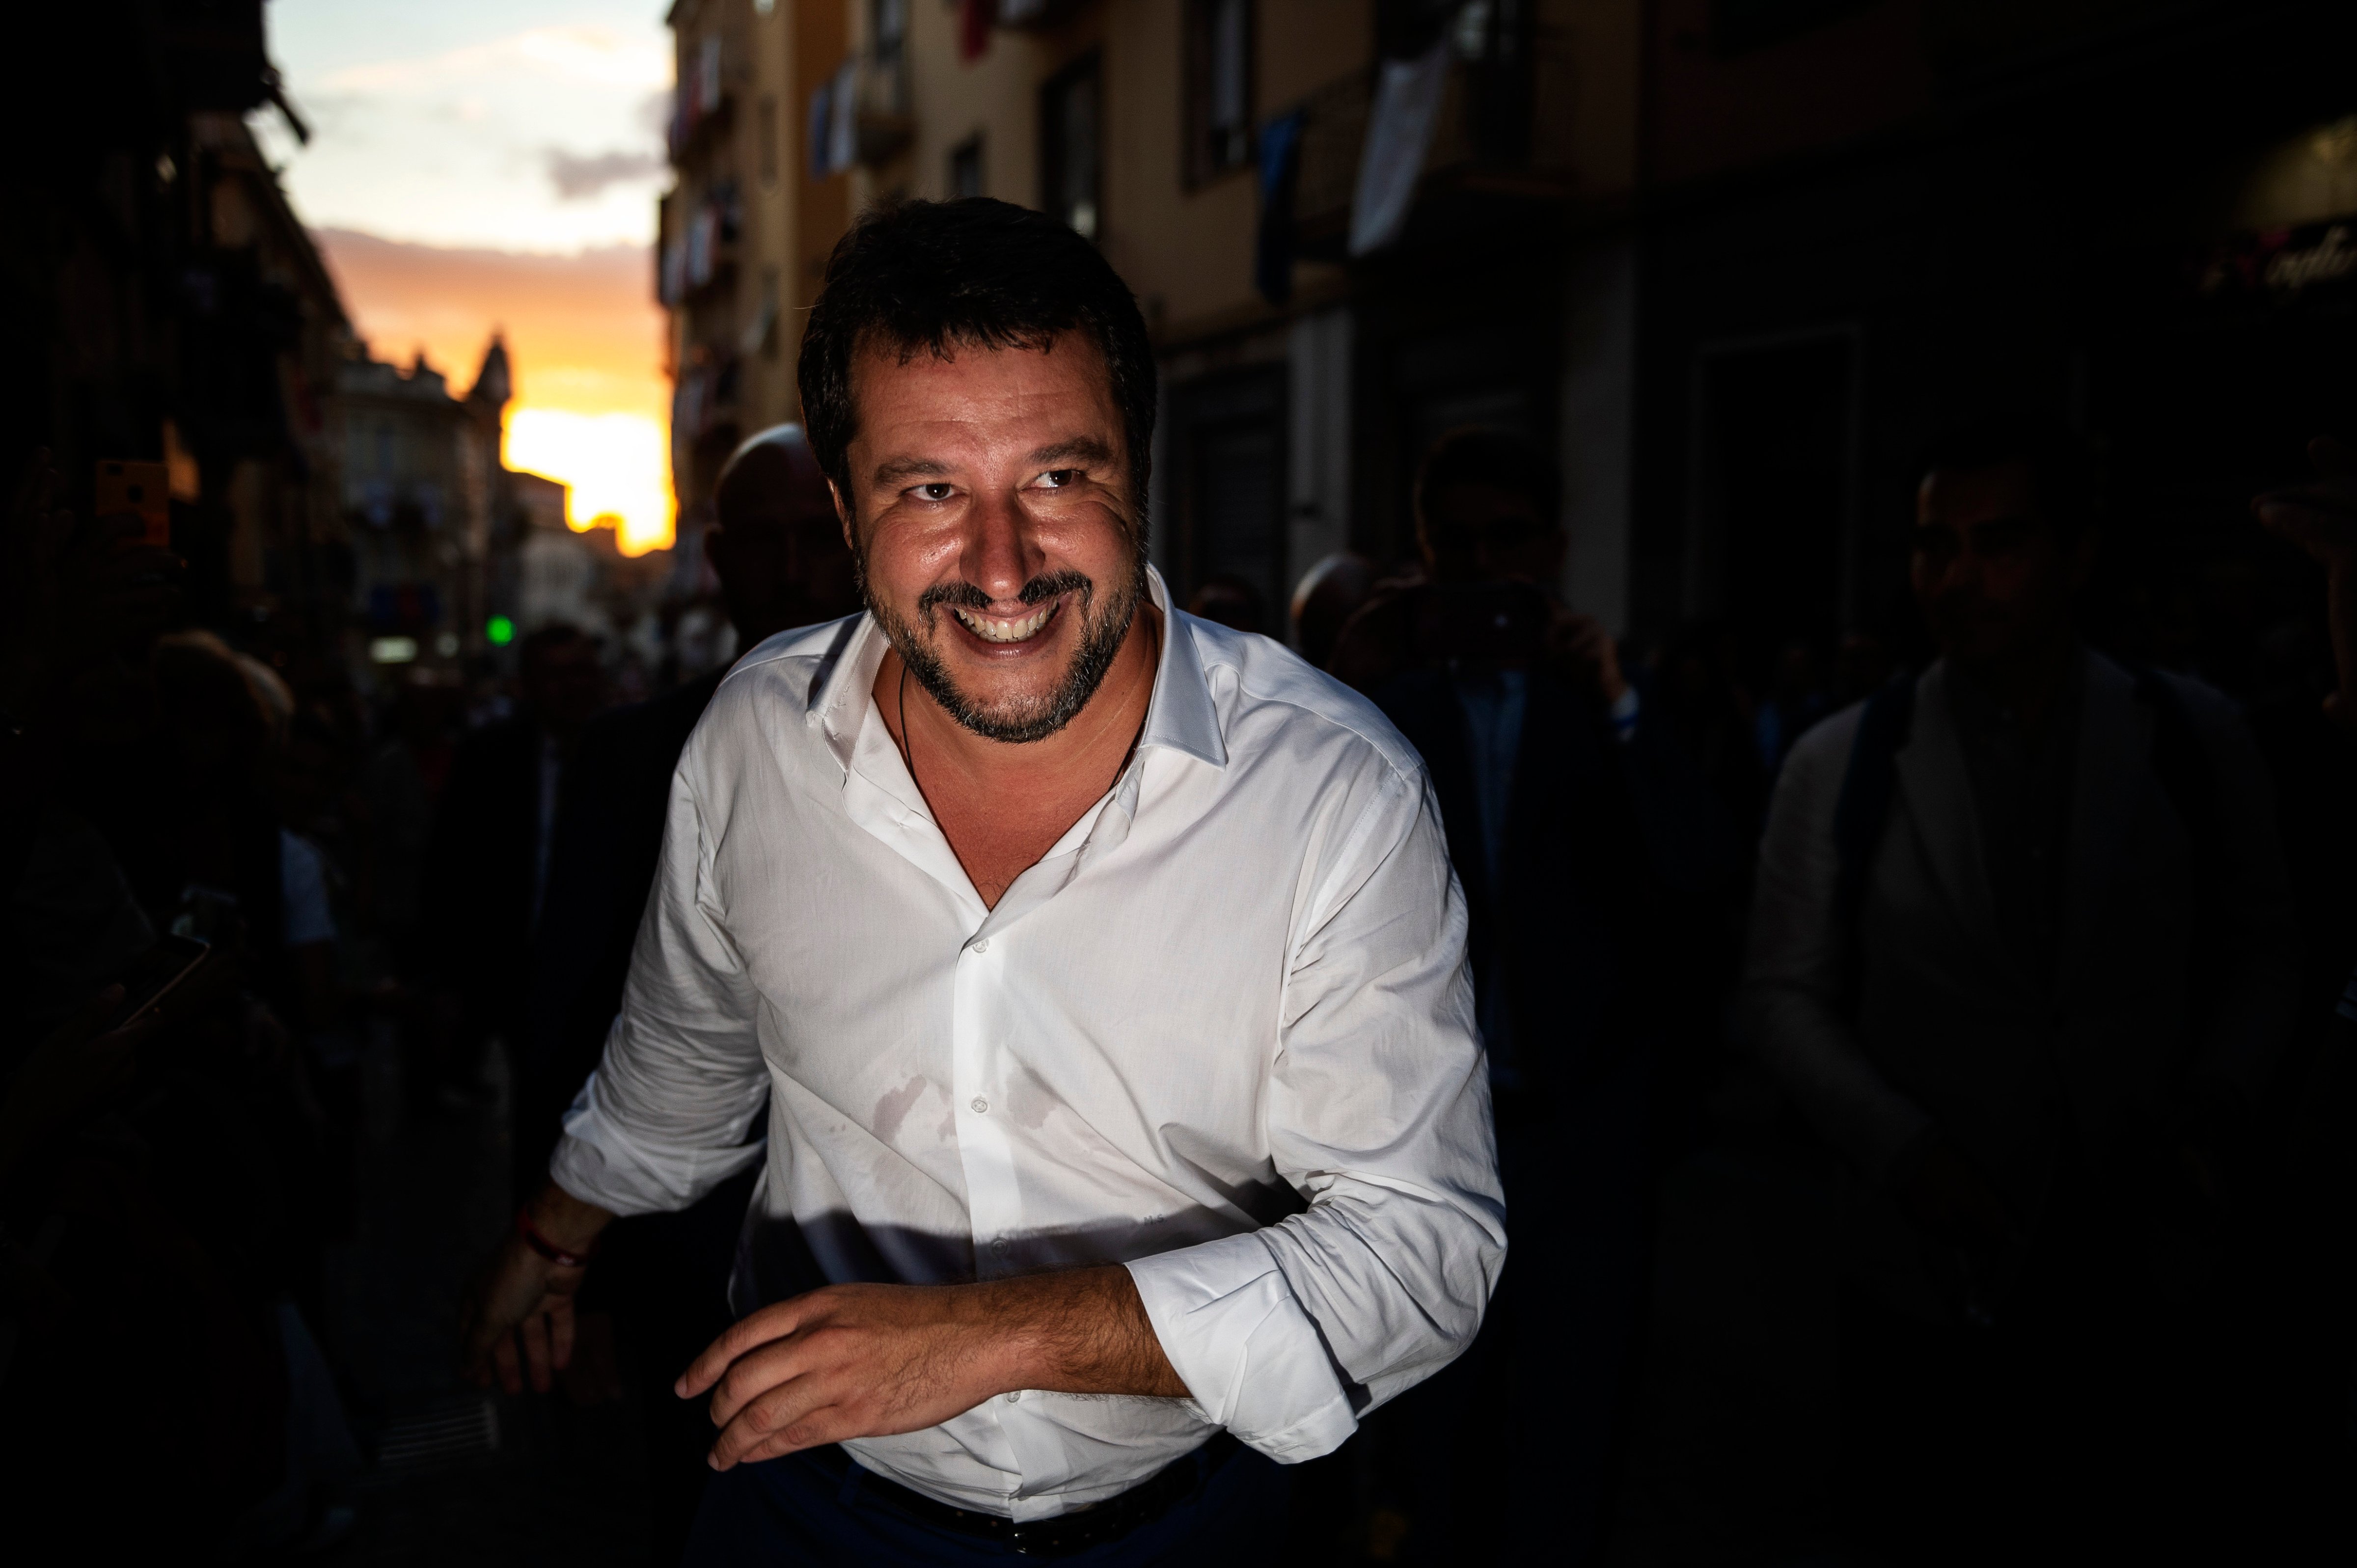 Italian deputy Prime Minister Matteo Salvini attends the celebration of the transport of Machine of Santa Rosa, an annual religious event that takes place in central Italy, on Sept. 3, 2018 in Viterbo, Italy (Antonio Masiello—Getty Images)